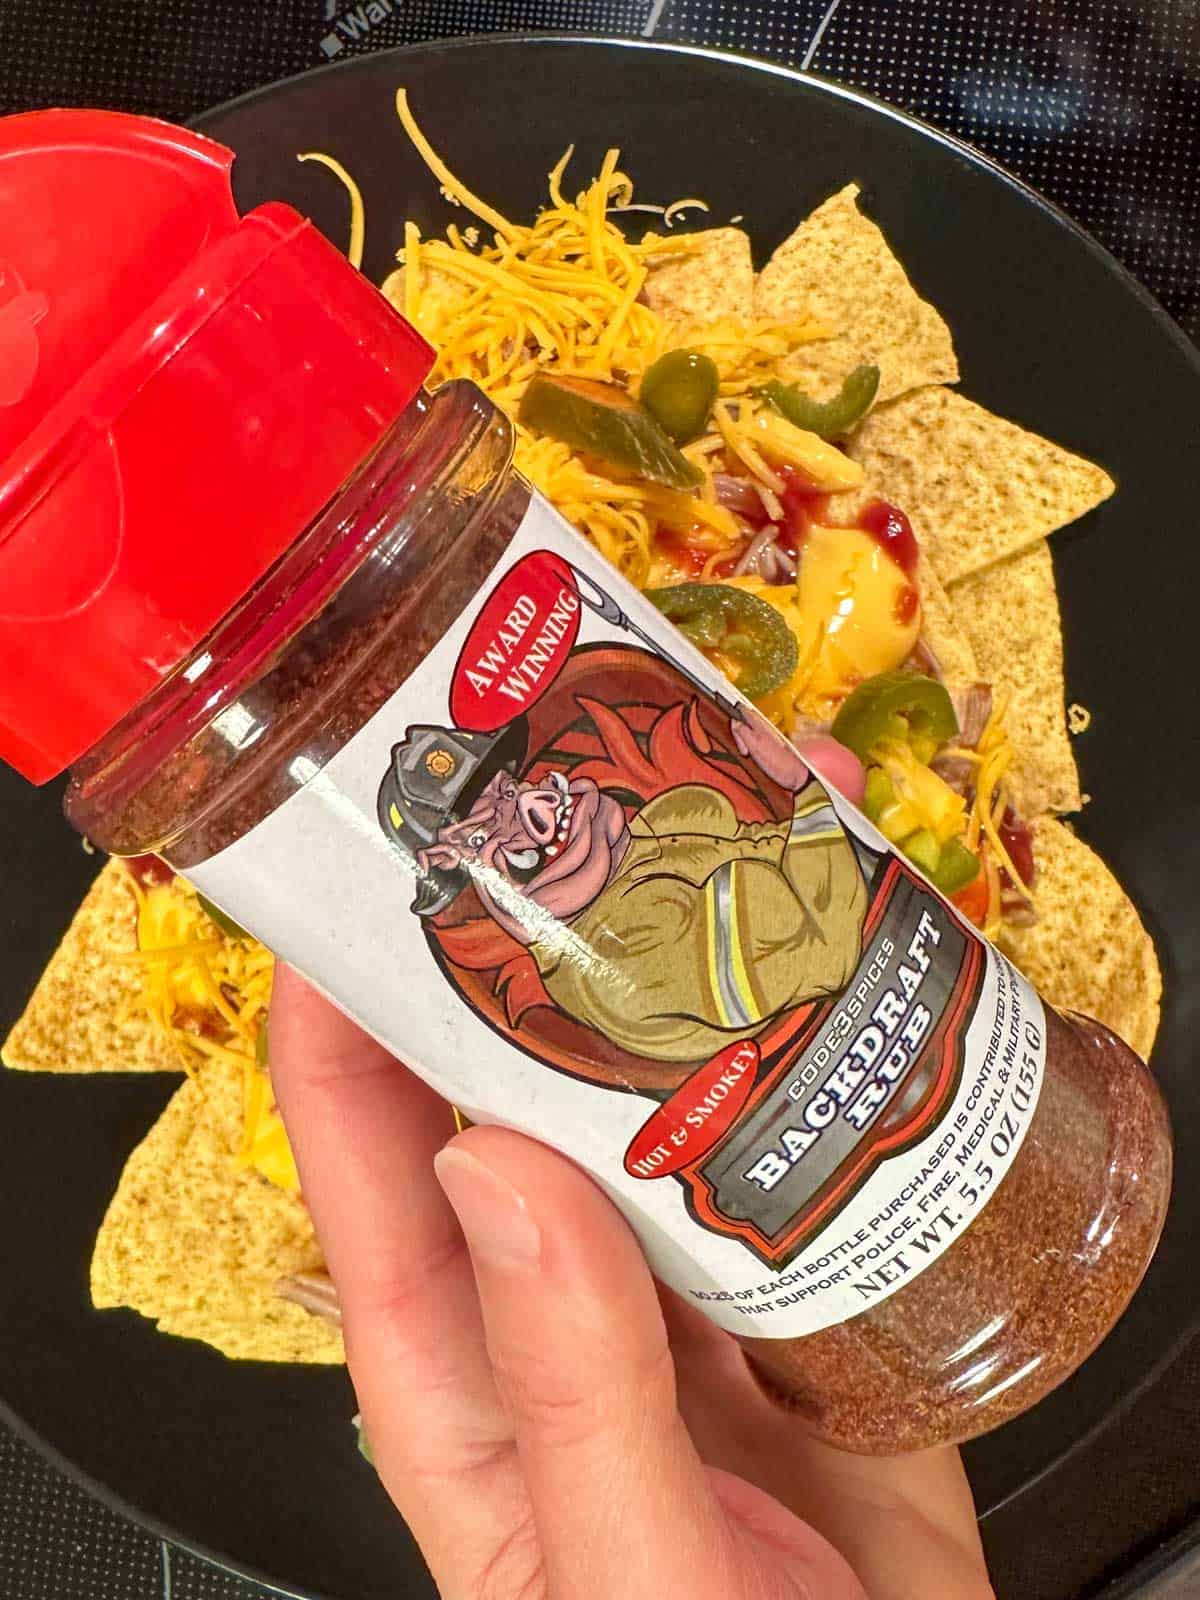 Tortilla chips topped with cheese sauce, shredded cheese, barbecue sauce, jalapenos and pulled pork on a black plate with a bottle of dry rub called Backdraft Rub being held by a hand in the foreground.